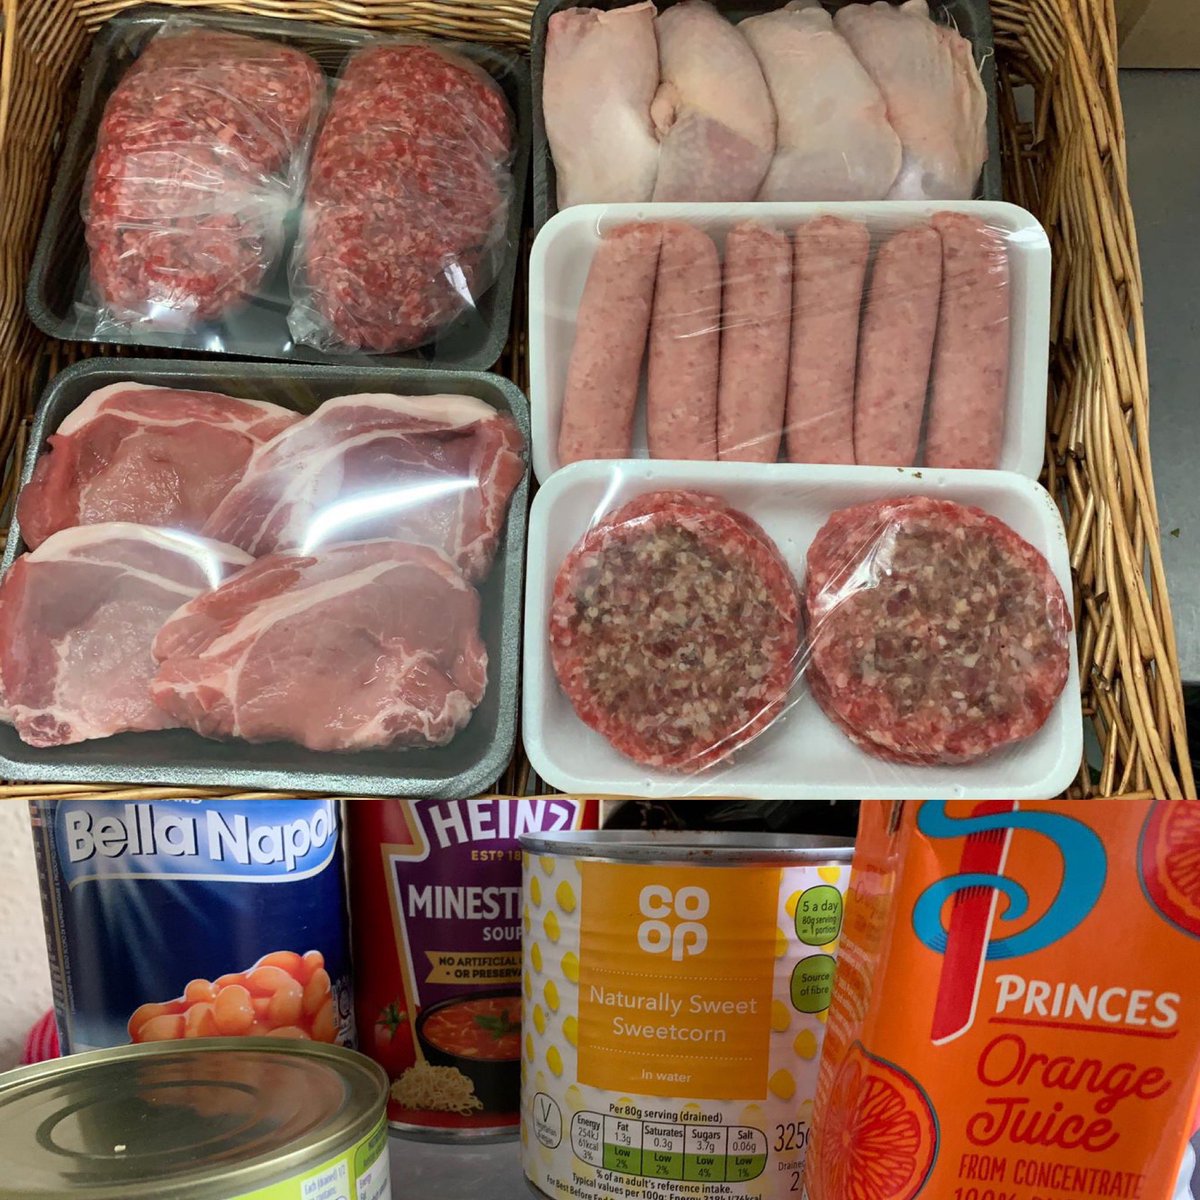 Food parcels for vulnerable children and families facing food poverty have been well-documented in the news this week. We’d just like to show you the fantastic range of food included in the 17 food parcels going out to local families today as part of our #potterspounds campaign